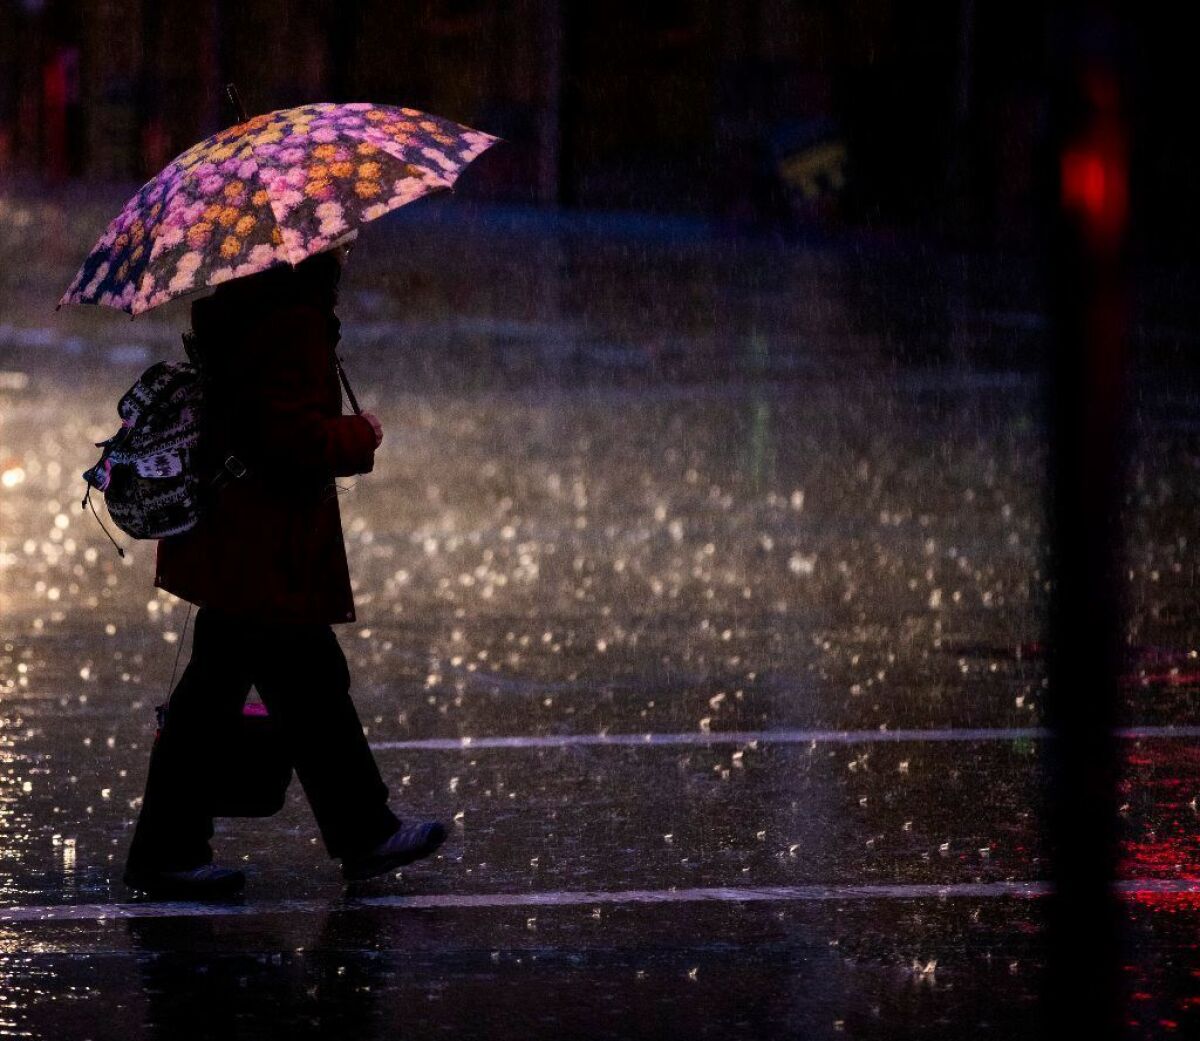 A pedestrian's umbrella is back lit by headlights, stop lights and street lights in the rain in Old Pasadena.